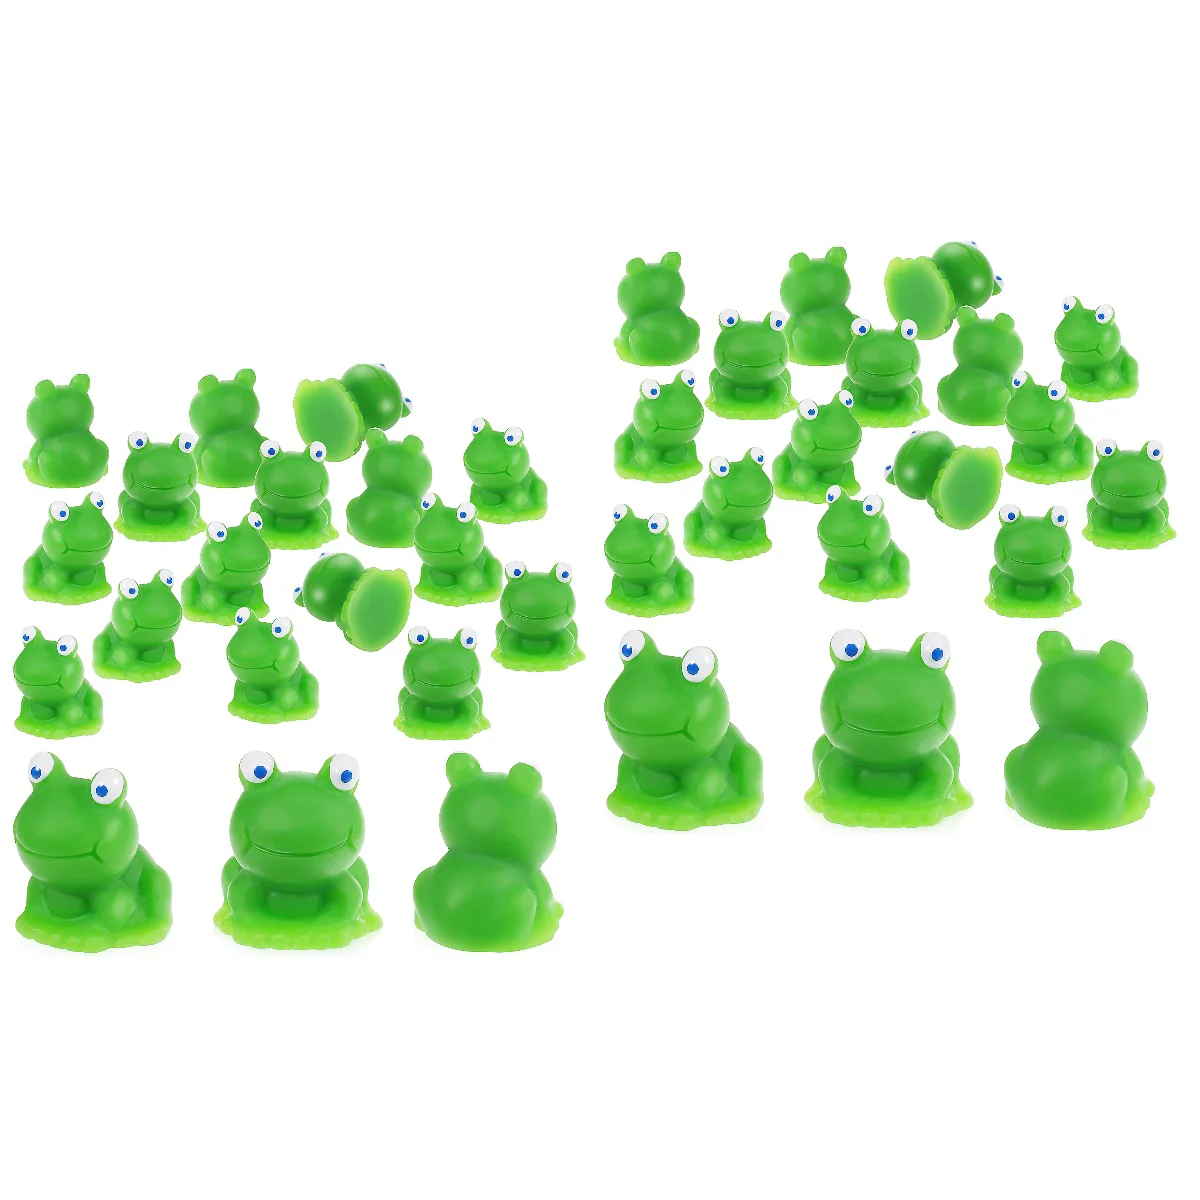 

40 Pcs Little Frog Small Frogs Statues Figurines Decors Resin Crafts Mini Miniature Landscape Animal